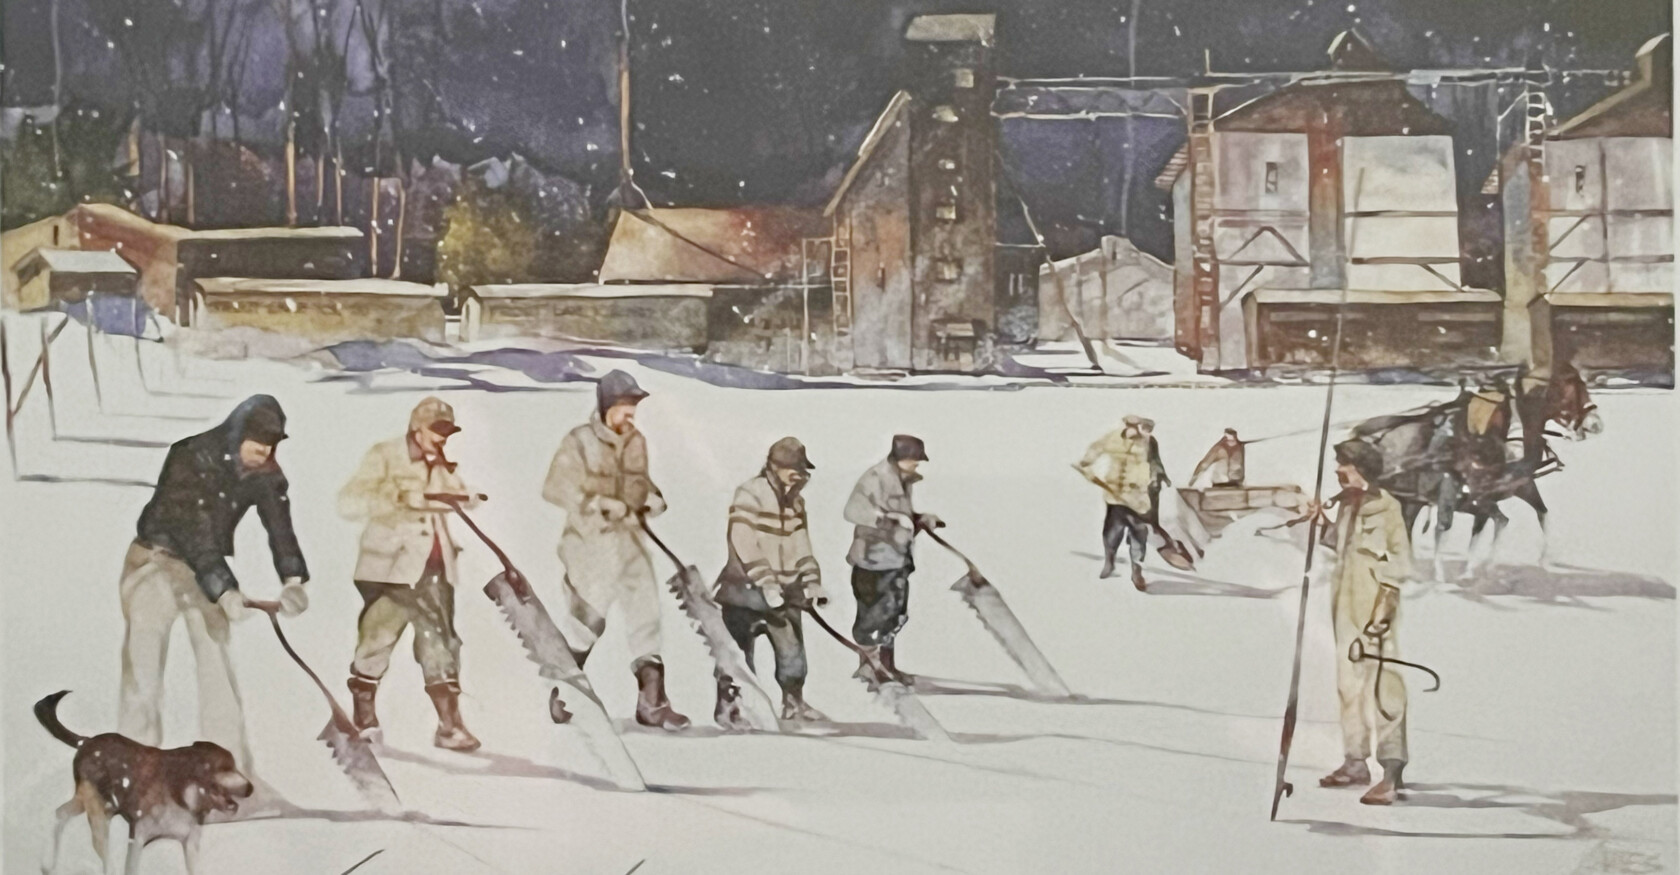 Artist rendering of the three story ice houses and workers carving ice on the lake.